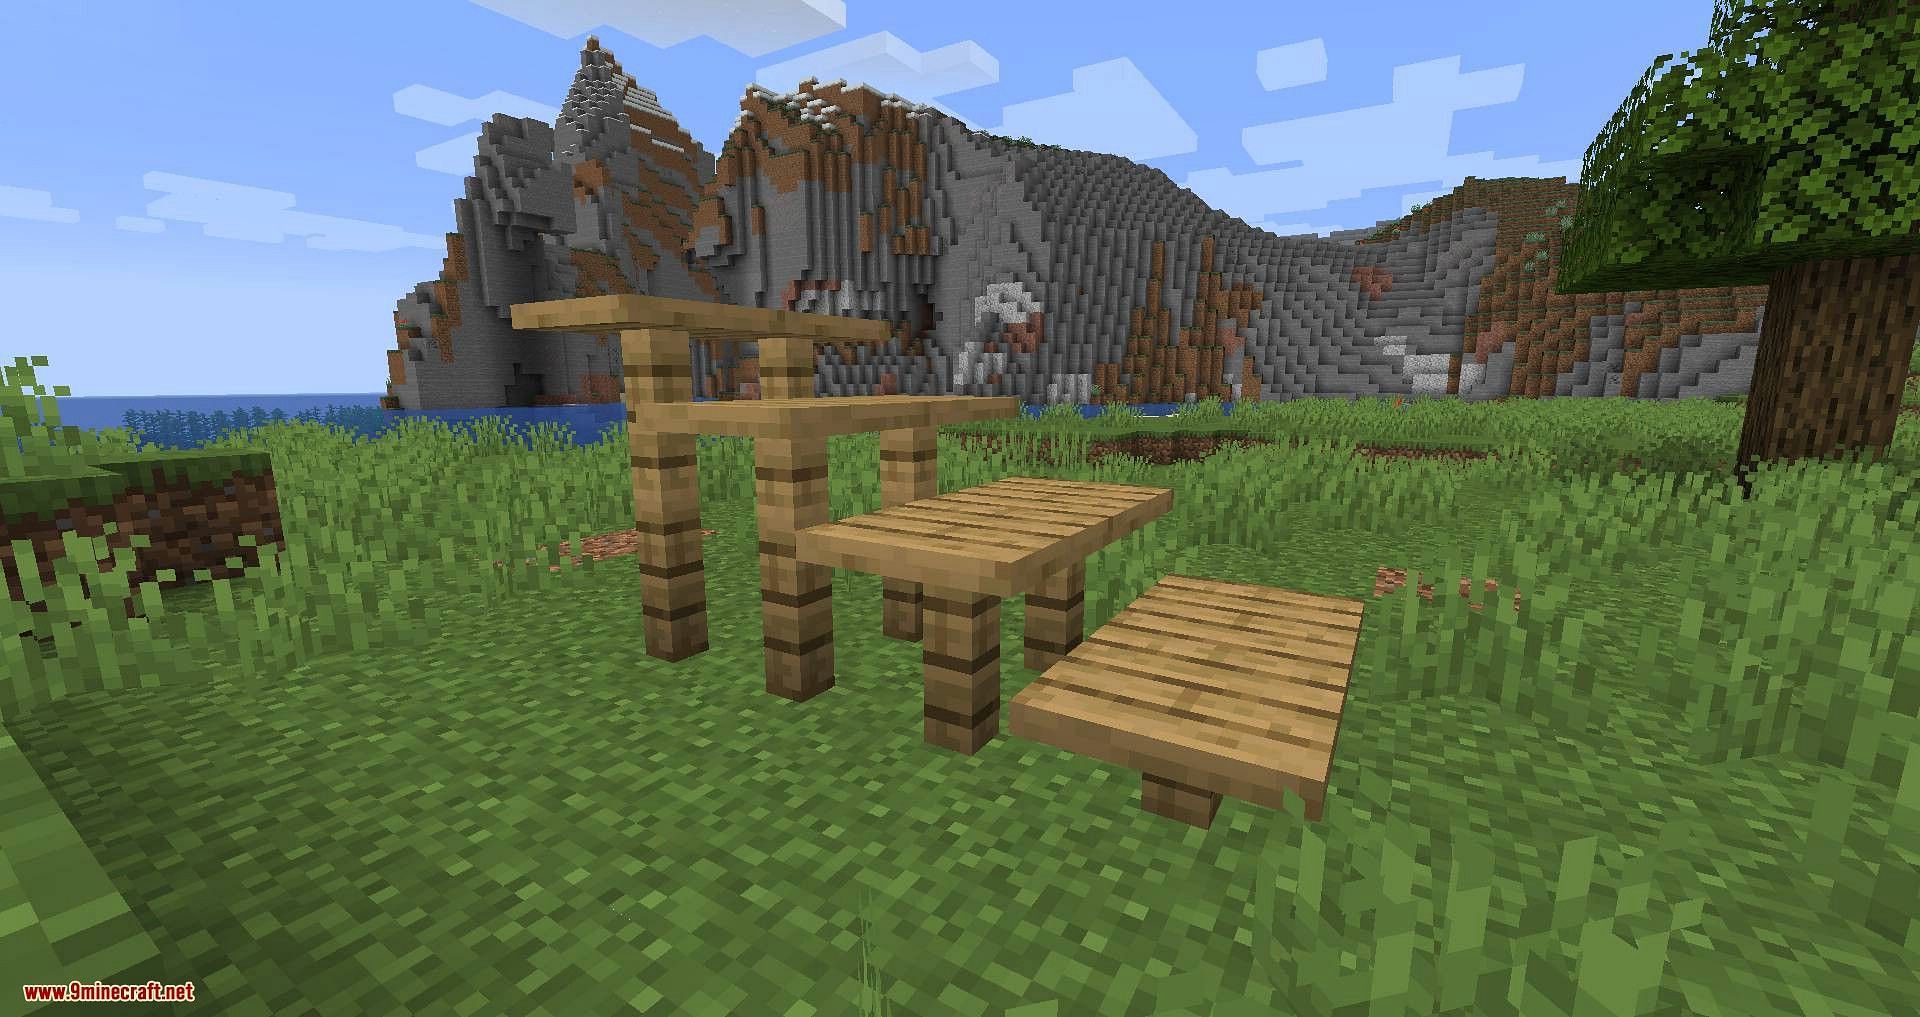 Adorn adds furniture capabilities to the game (Image via Minecraft)